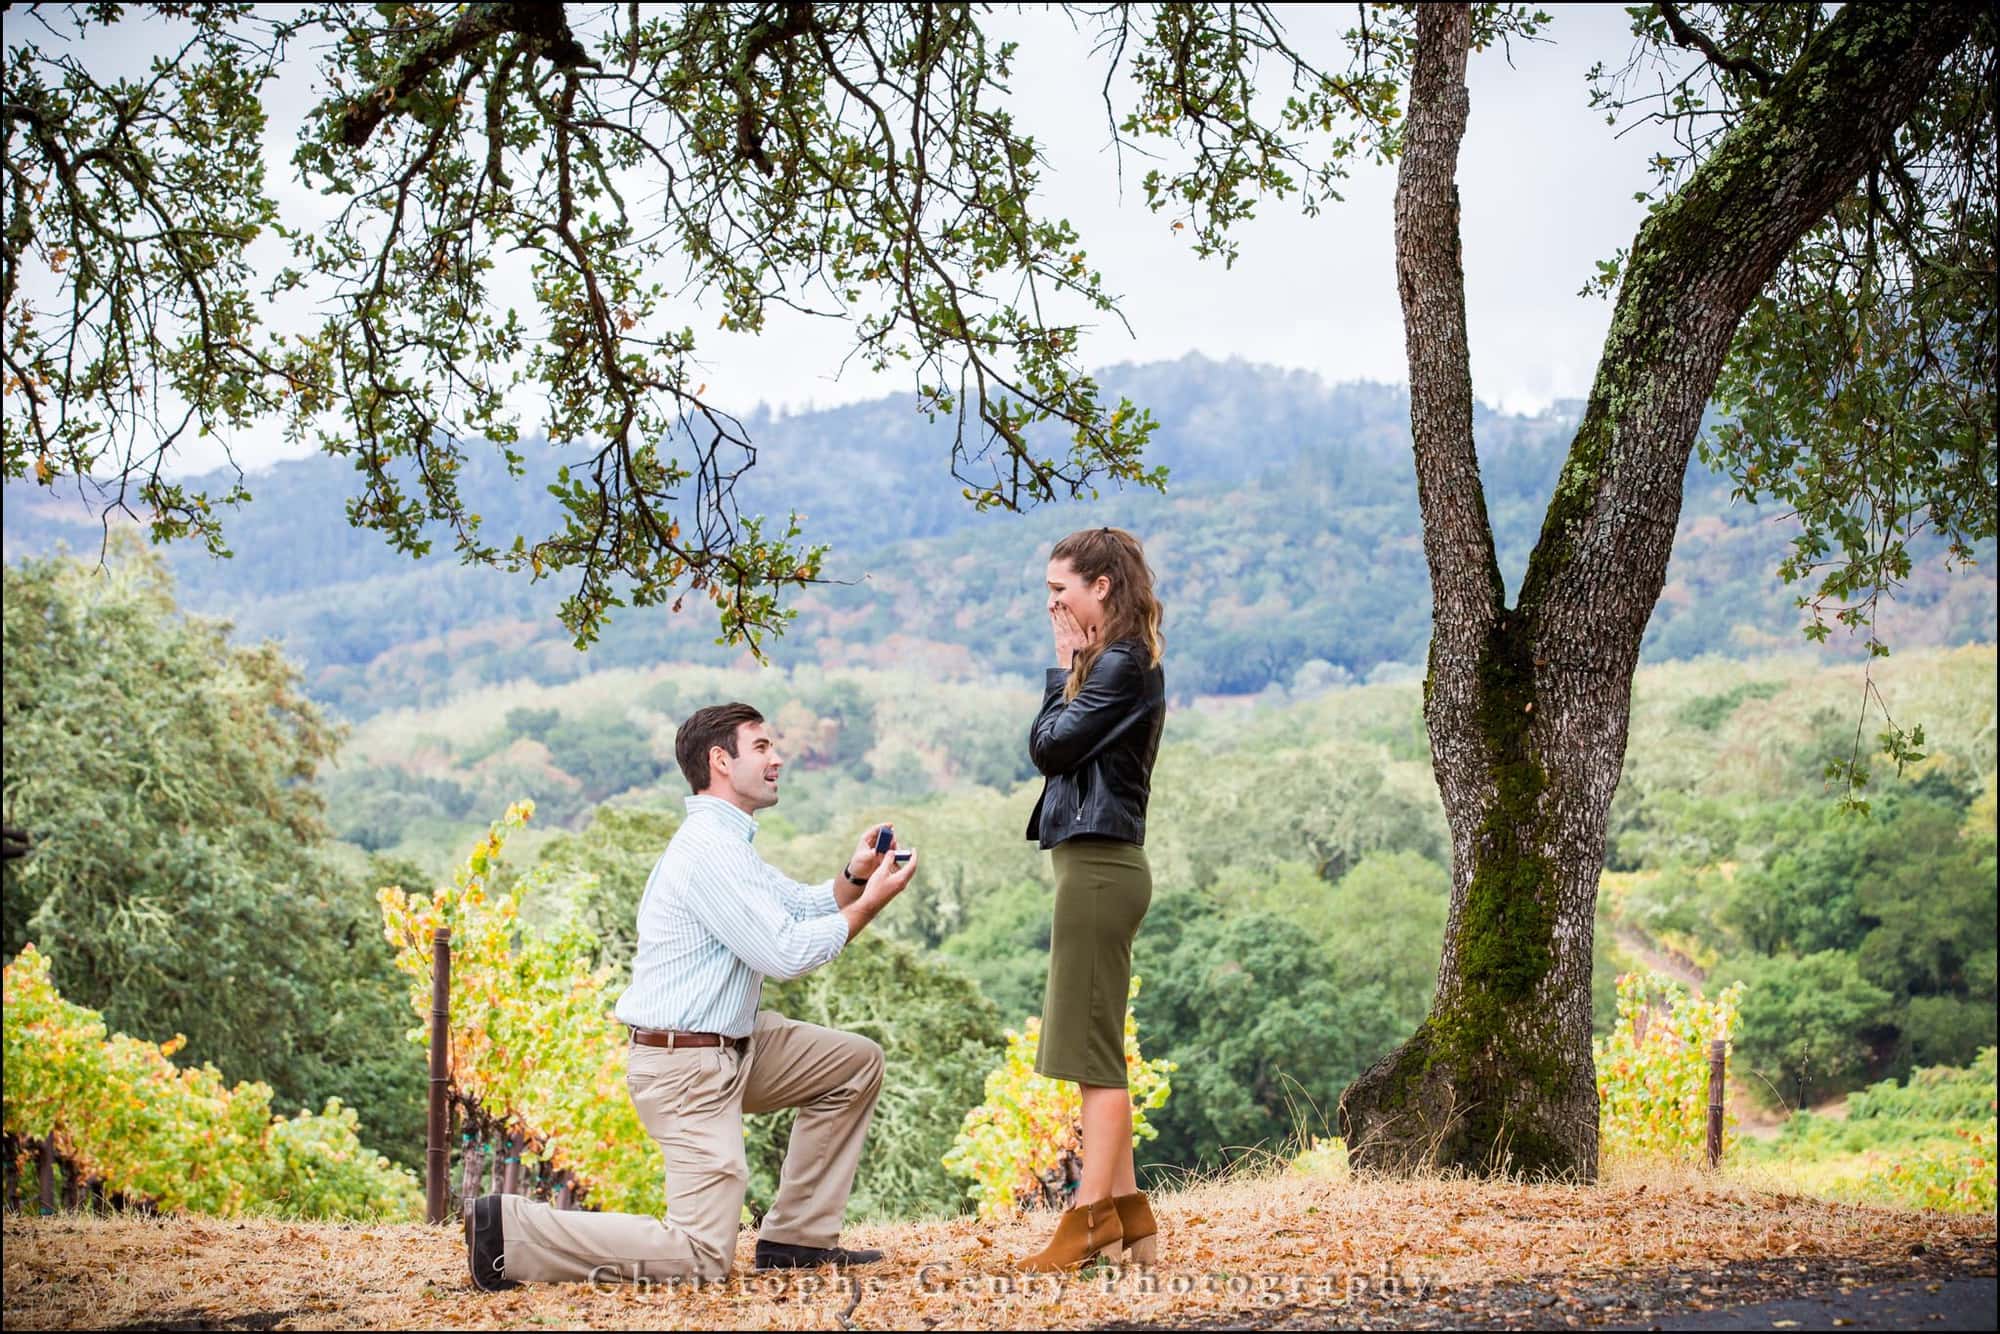 Marriage Proposal Photography in The Napa Valley - Buehler Vineyards, St Helena, CA